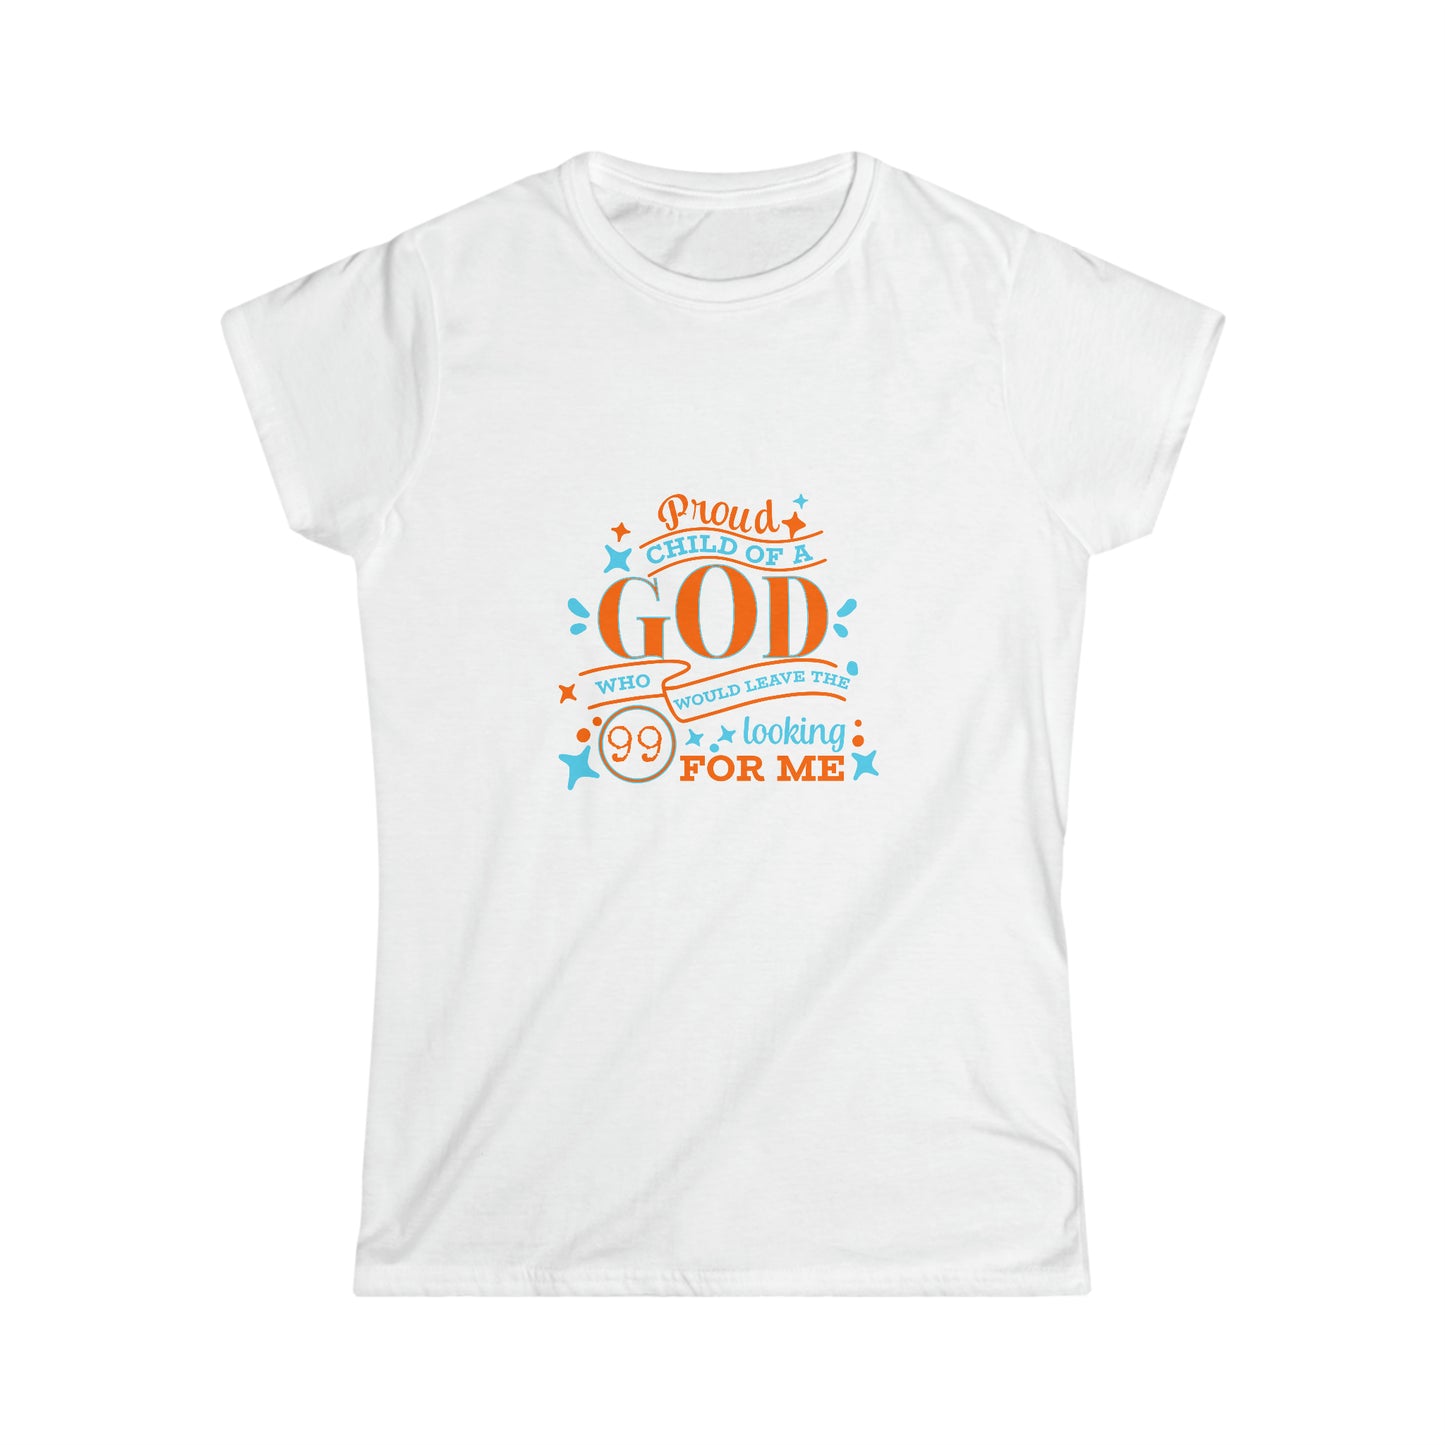 Proud Child Of A God Who Would Leave the 99 Looking For Me Women's T-shirt